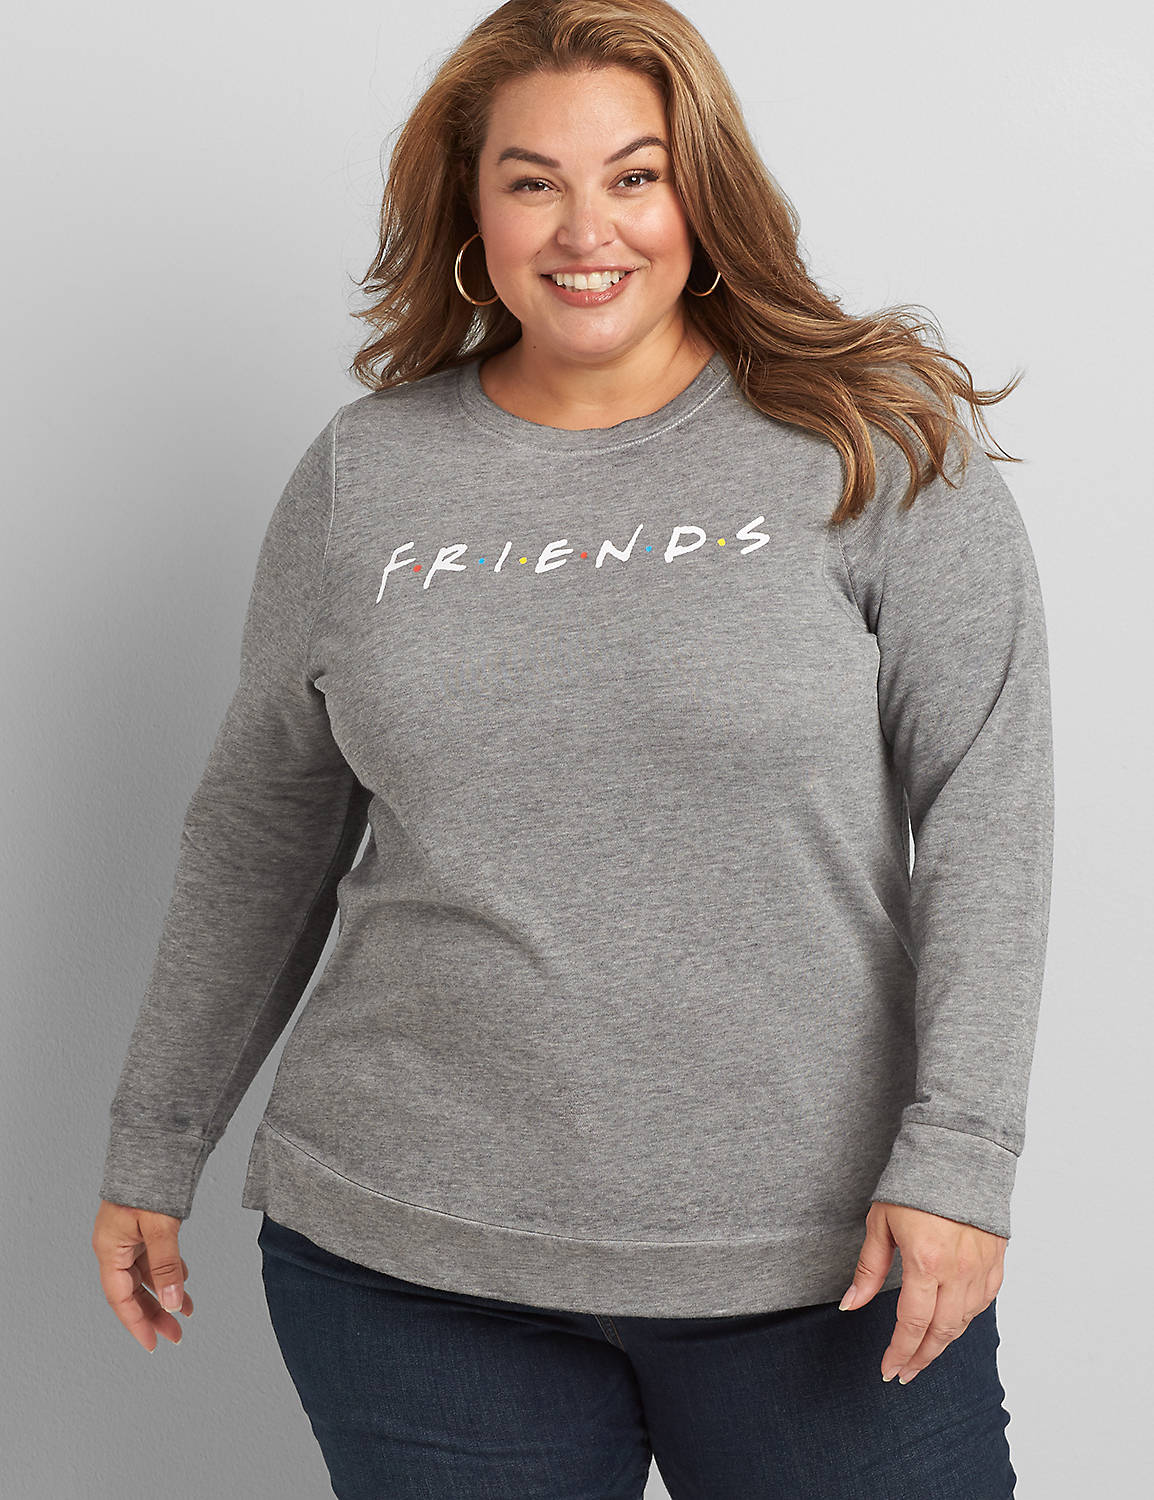 Long Sleeve Crew Neck Sweatshirt with Side Slit Graphic: FRIENDS 1119269:BCVCF07-161 Charcoal Heather:14/16 Product Image 1